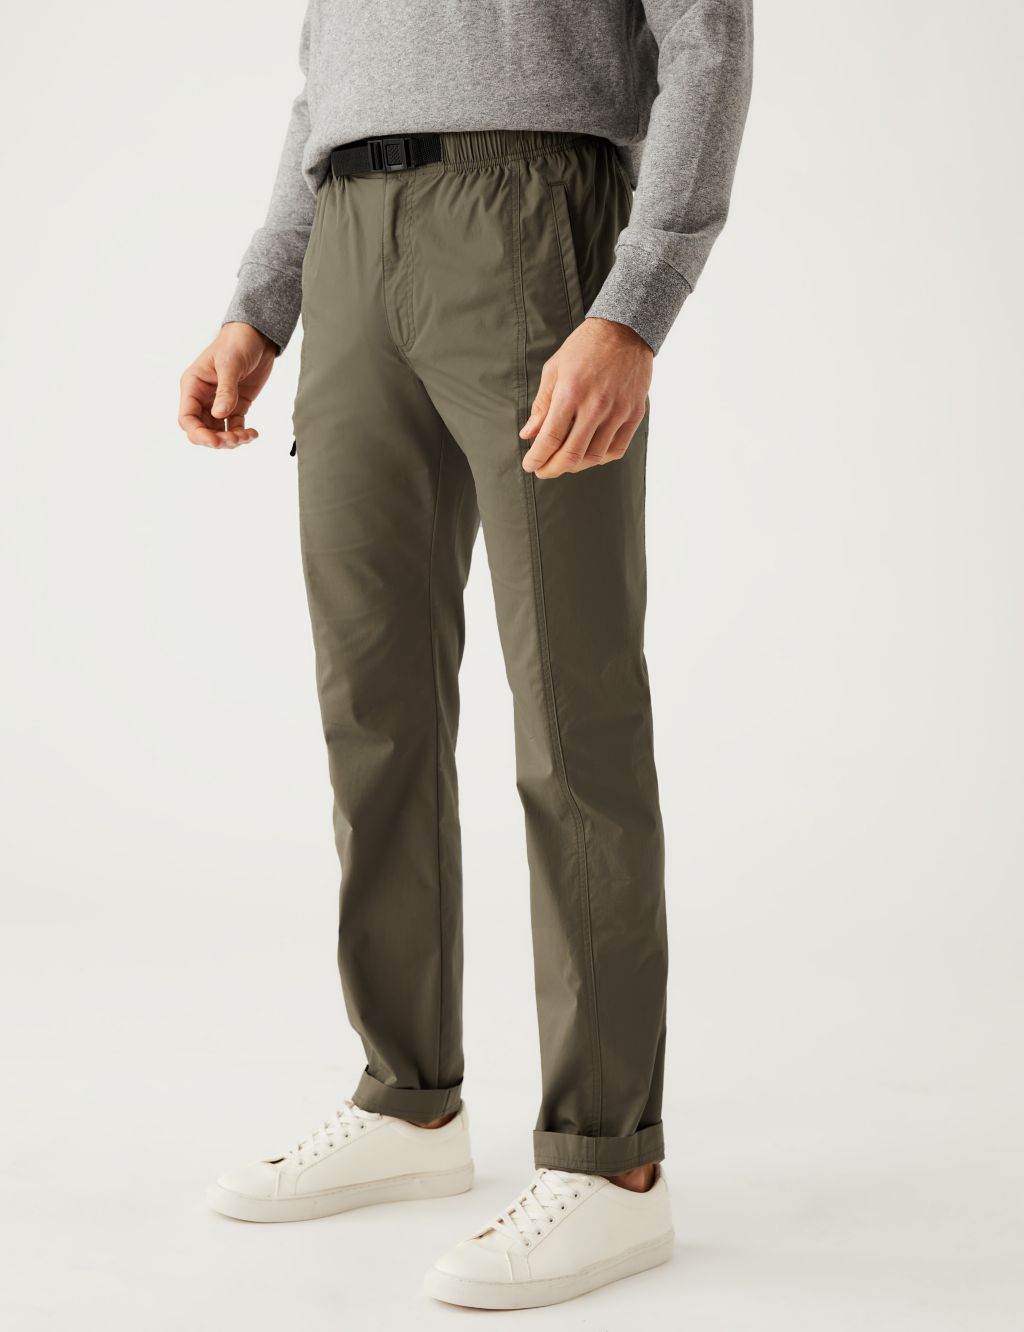 Slim Fit Belted Trekking Trousers image 2